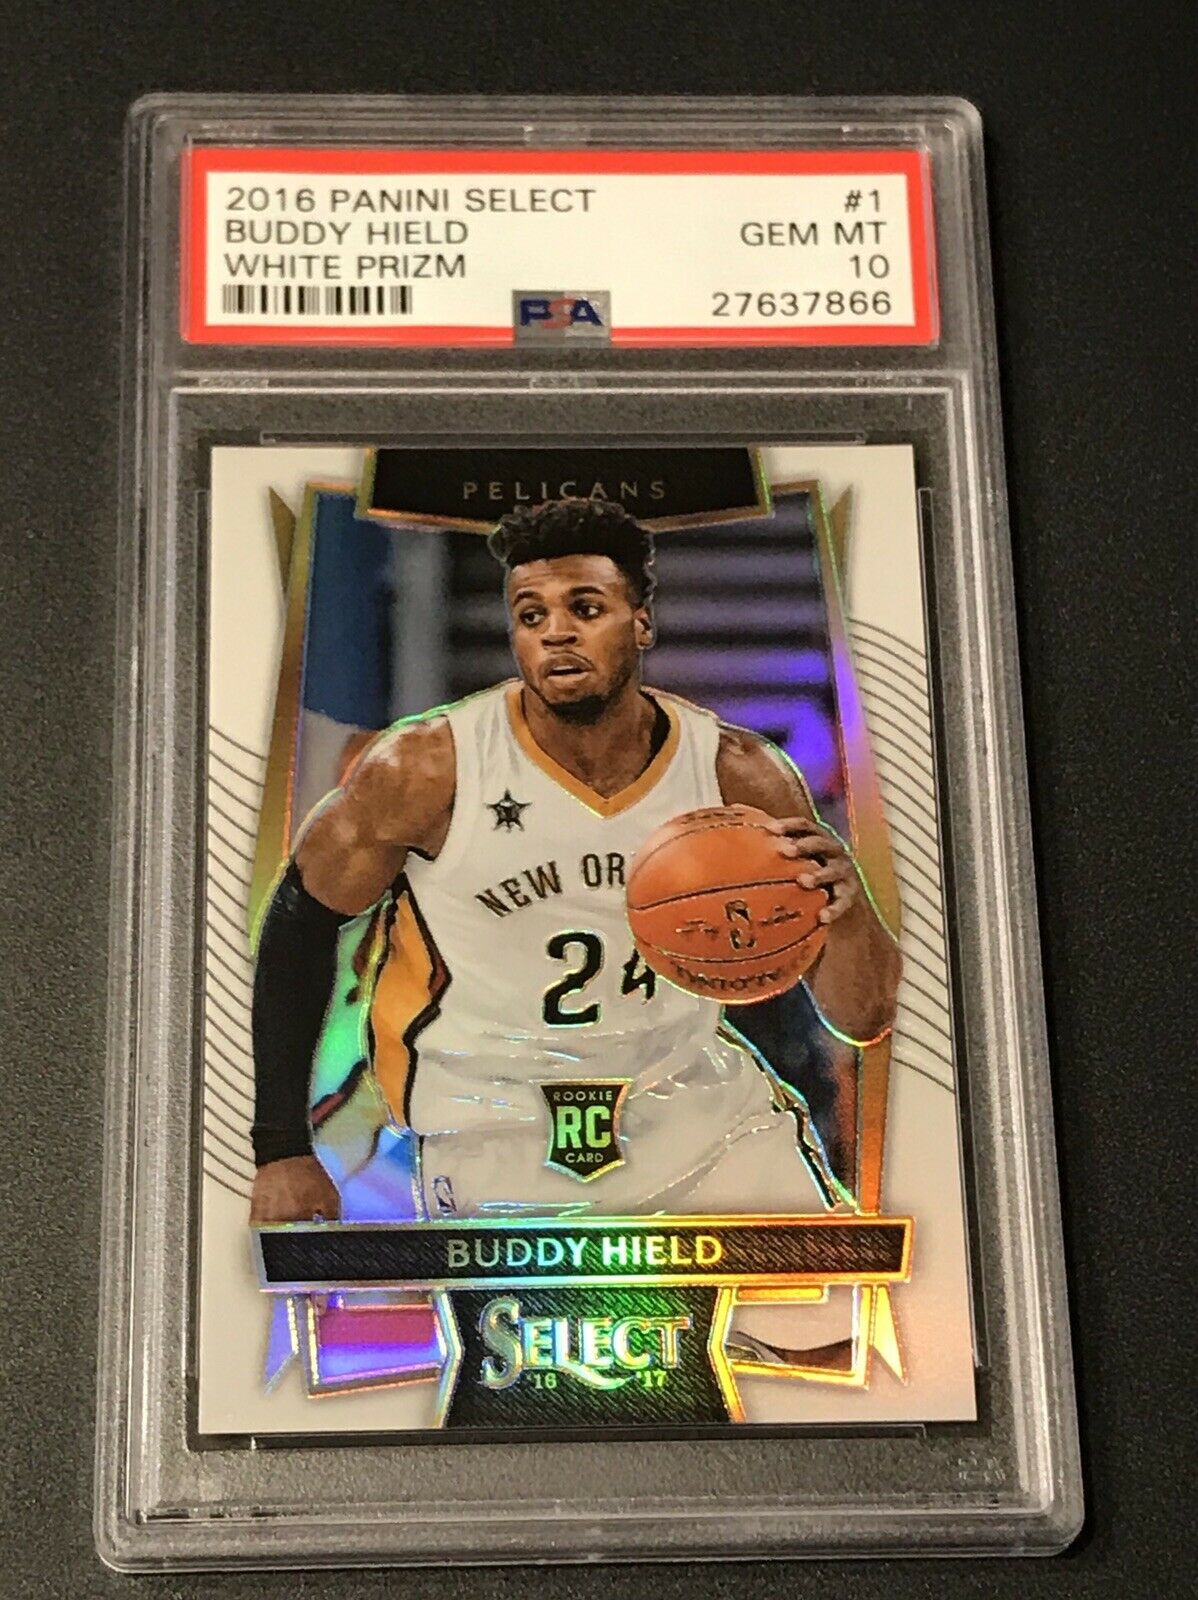 Image of 2016 Panini Select Buddy Hield White Prizm sports trading card